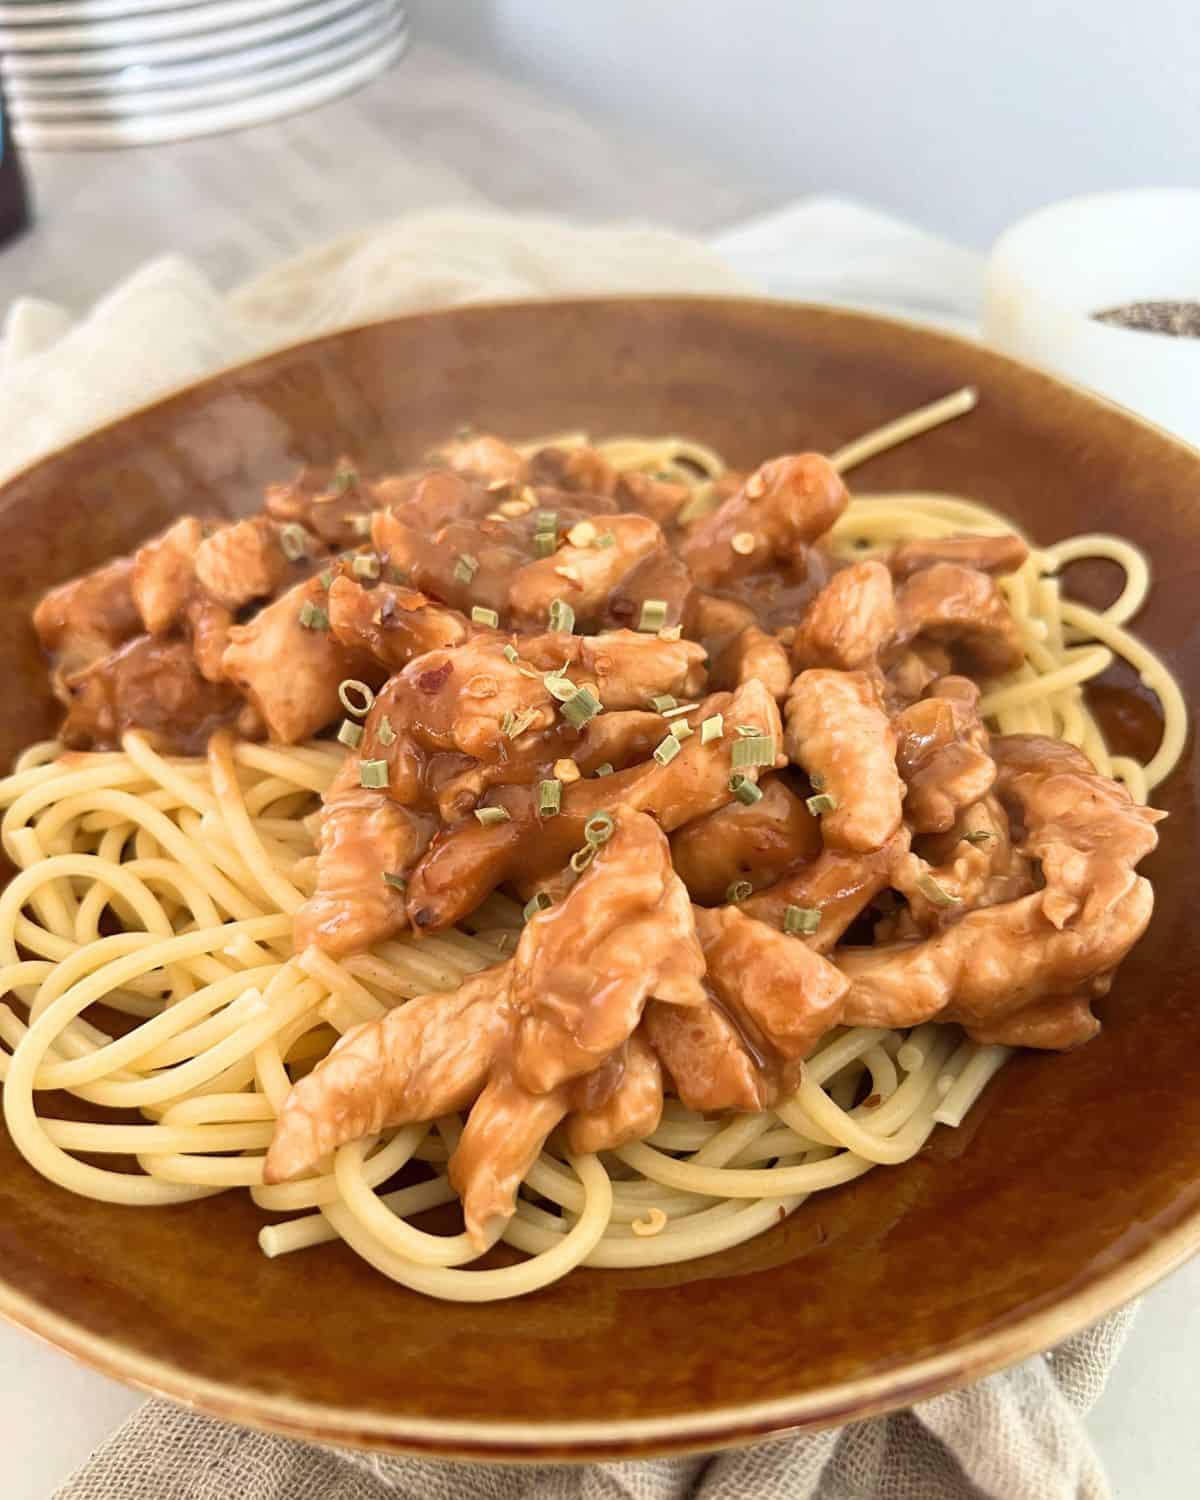 Coated chicken with peanut sauce over noodles. 